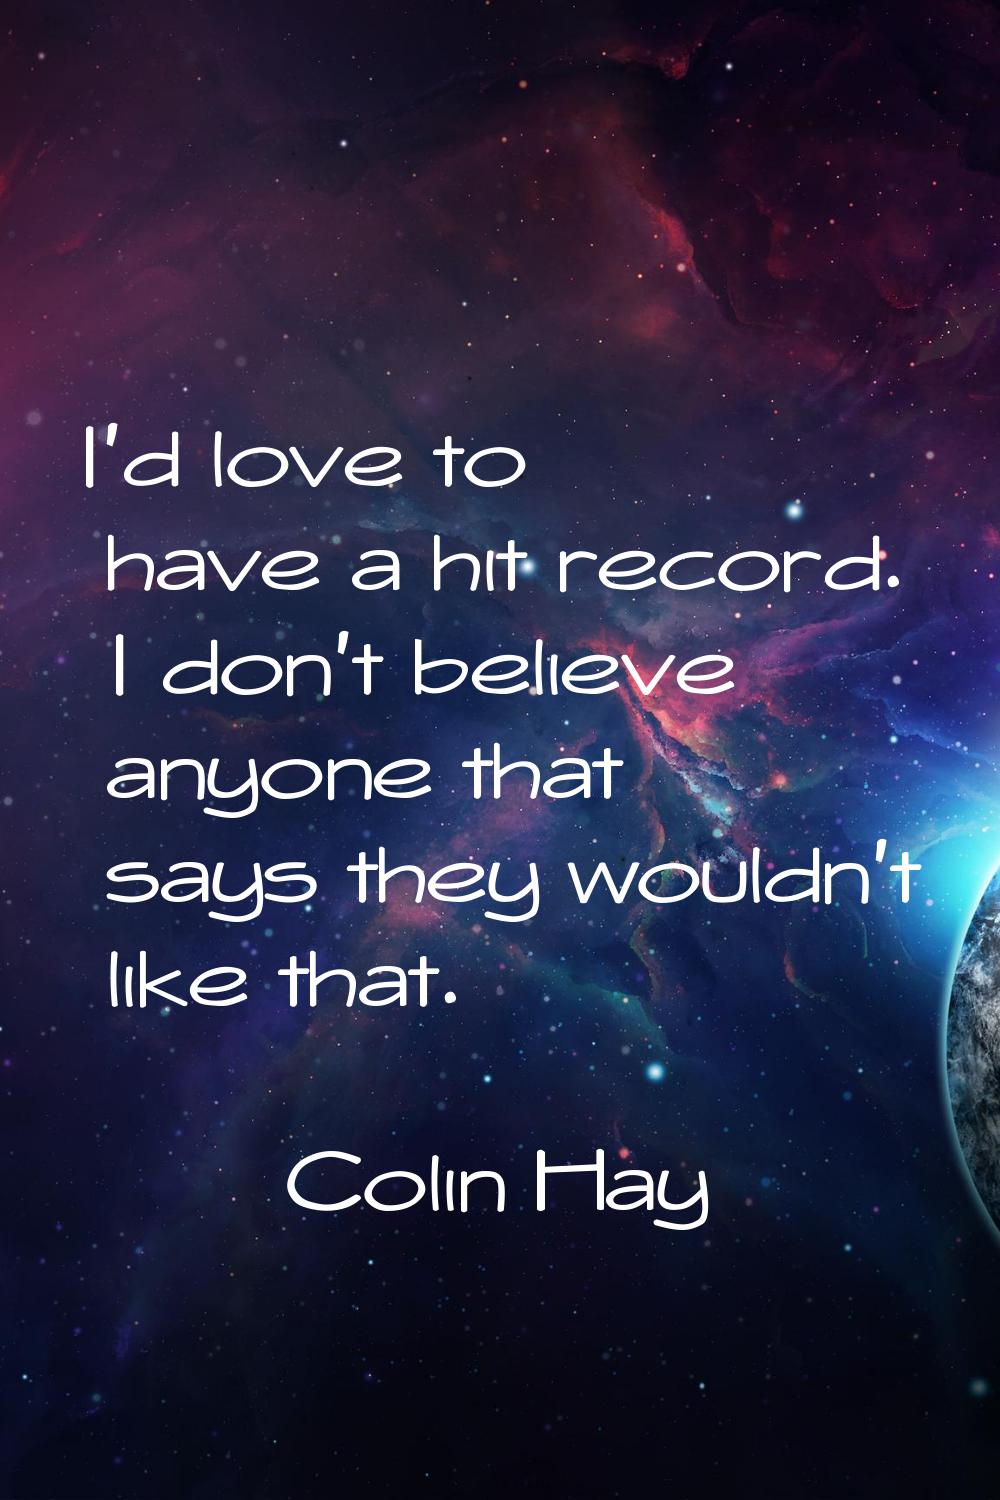 I'd love to have a hit record. I don't believe anyone that says they wouldn't like that.